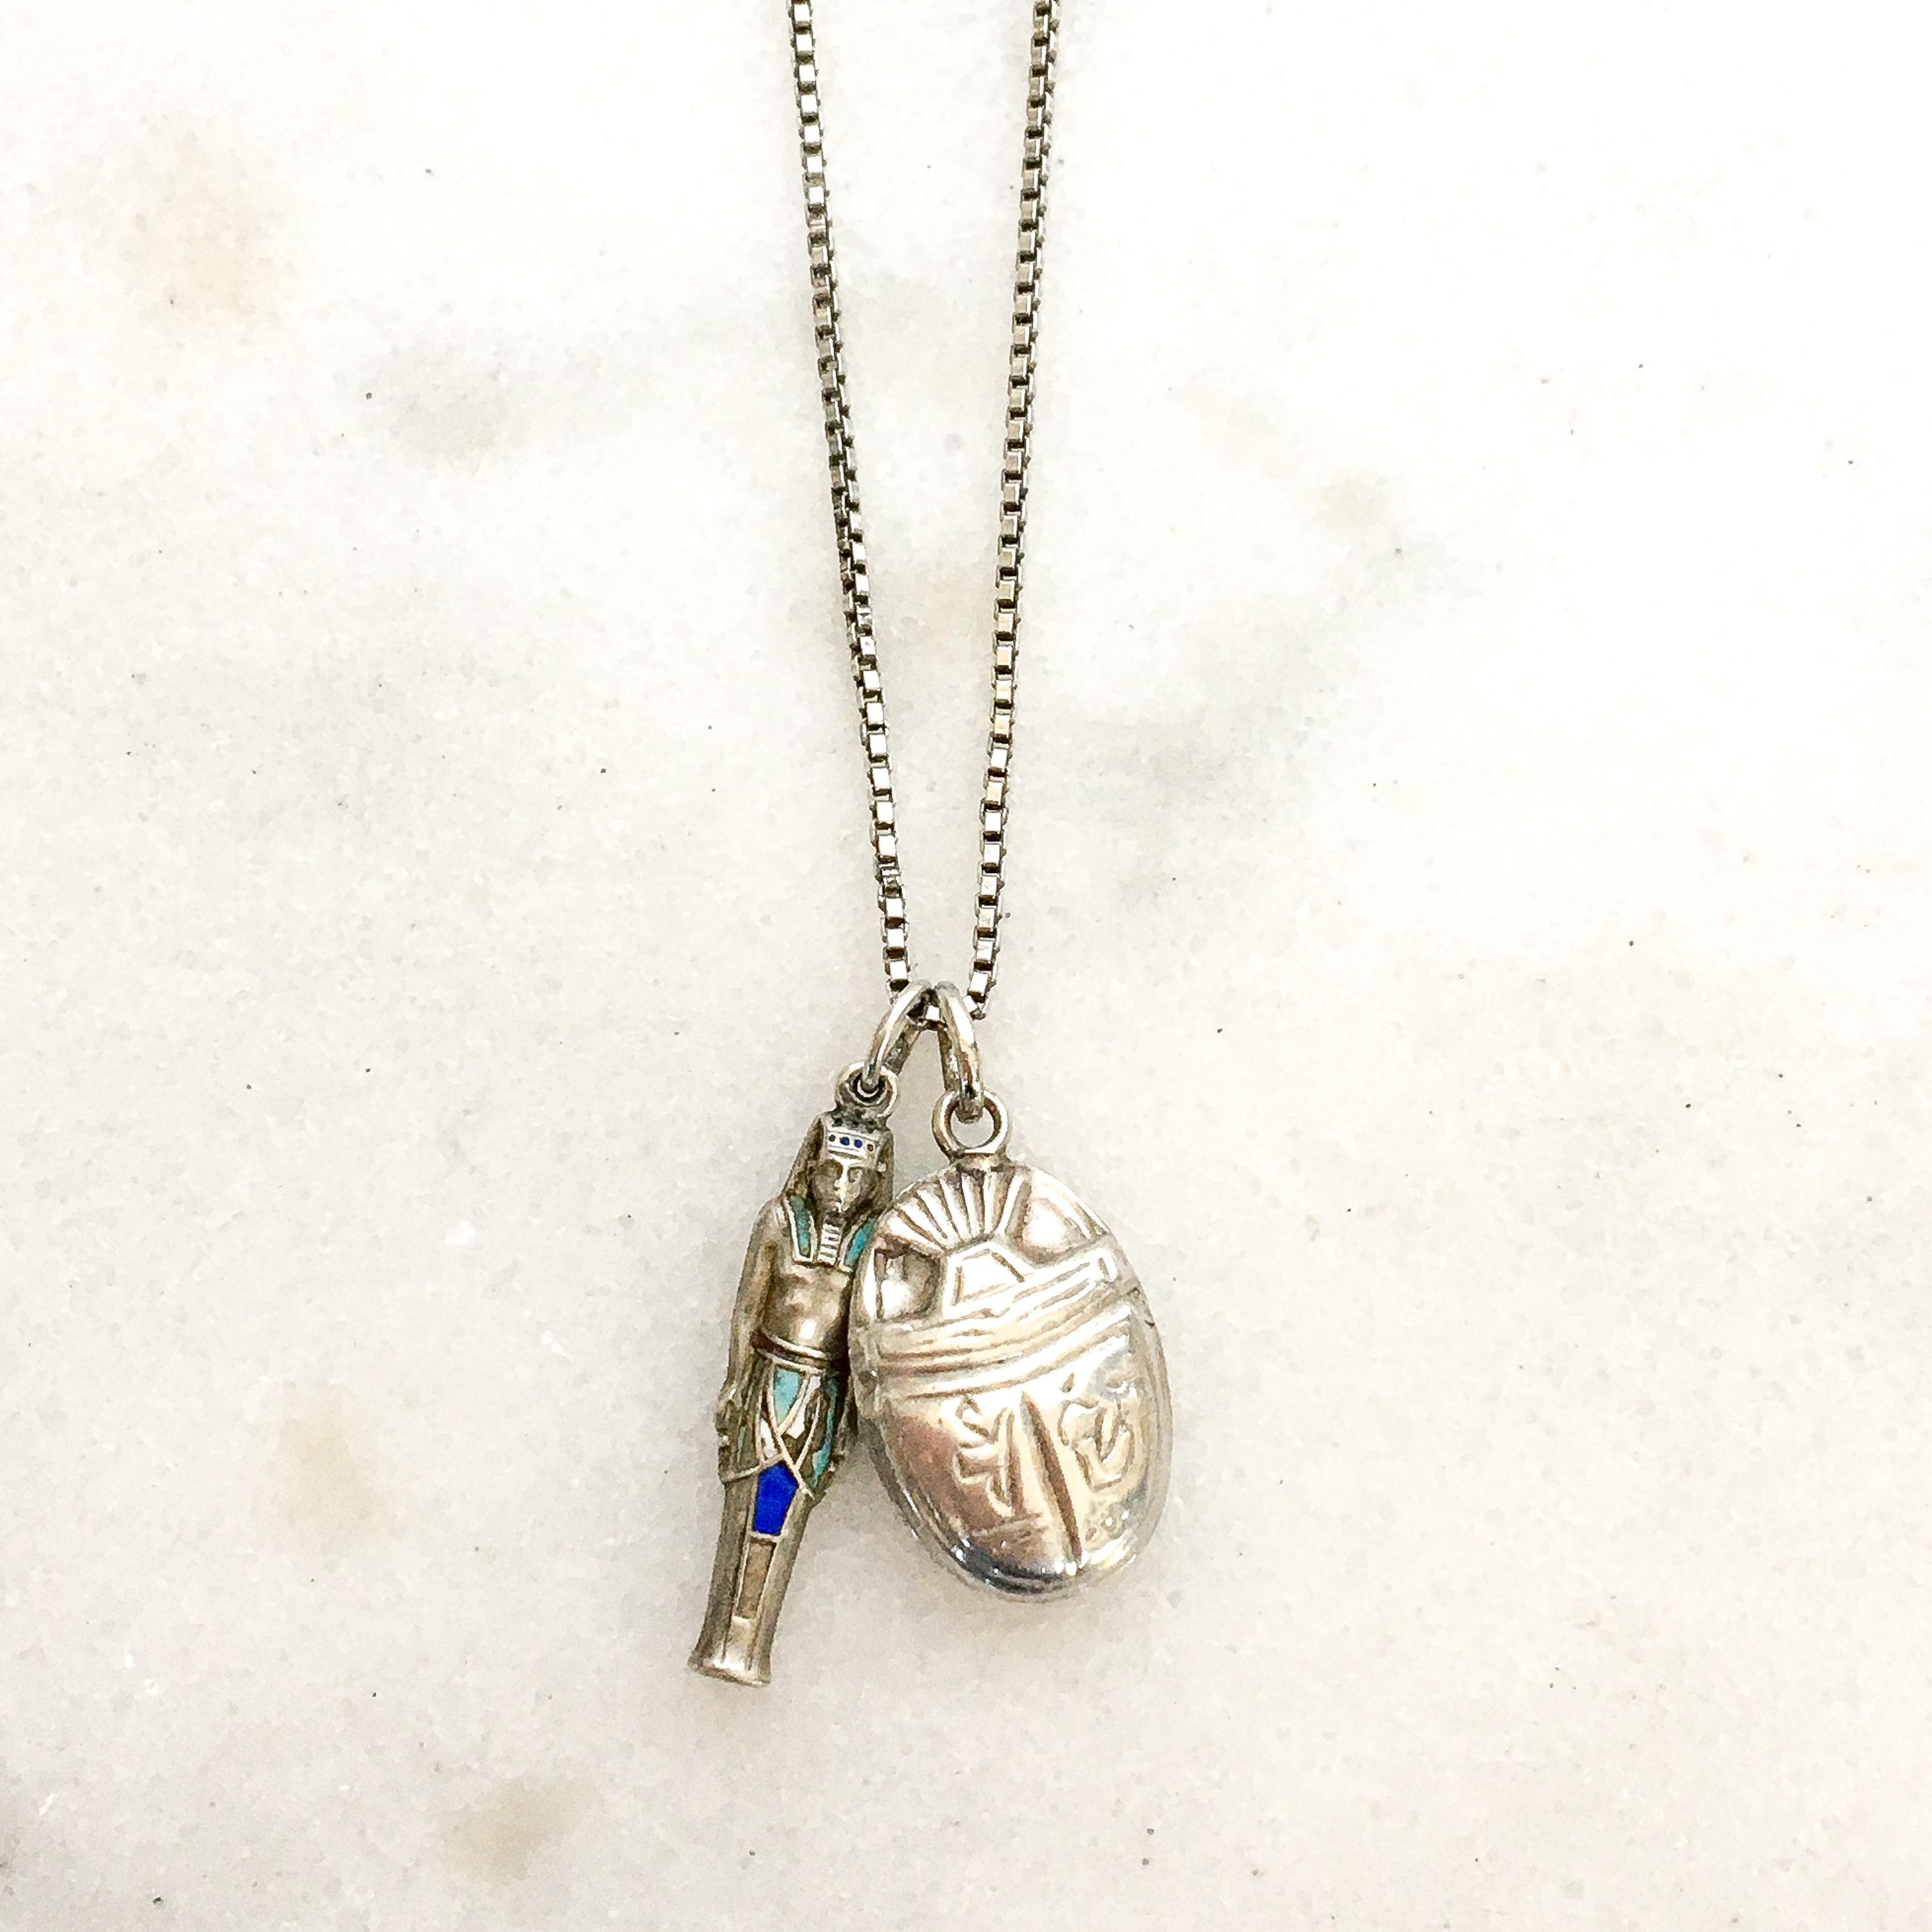 Three-dimensional silver and enameled charm of Egypt Pharaoh Ramses. The colors of this antique find are stunning with its cobalt blue, white and turquoise. Pharaoh Ramses makes a delightful gift for yourself or for someone who loves the Egypt